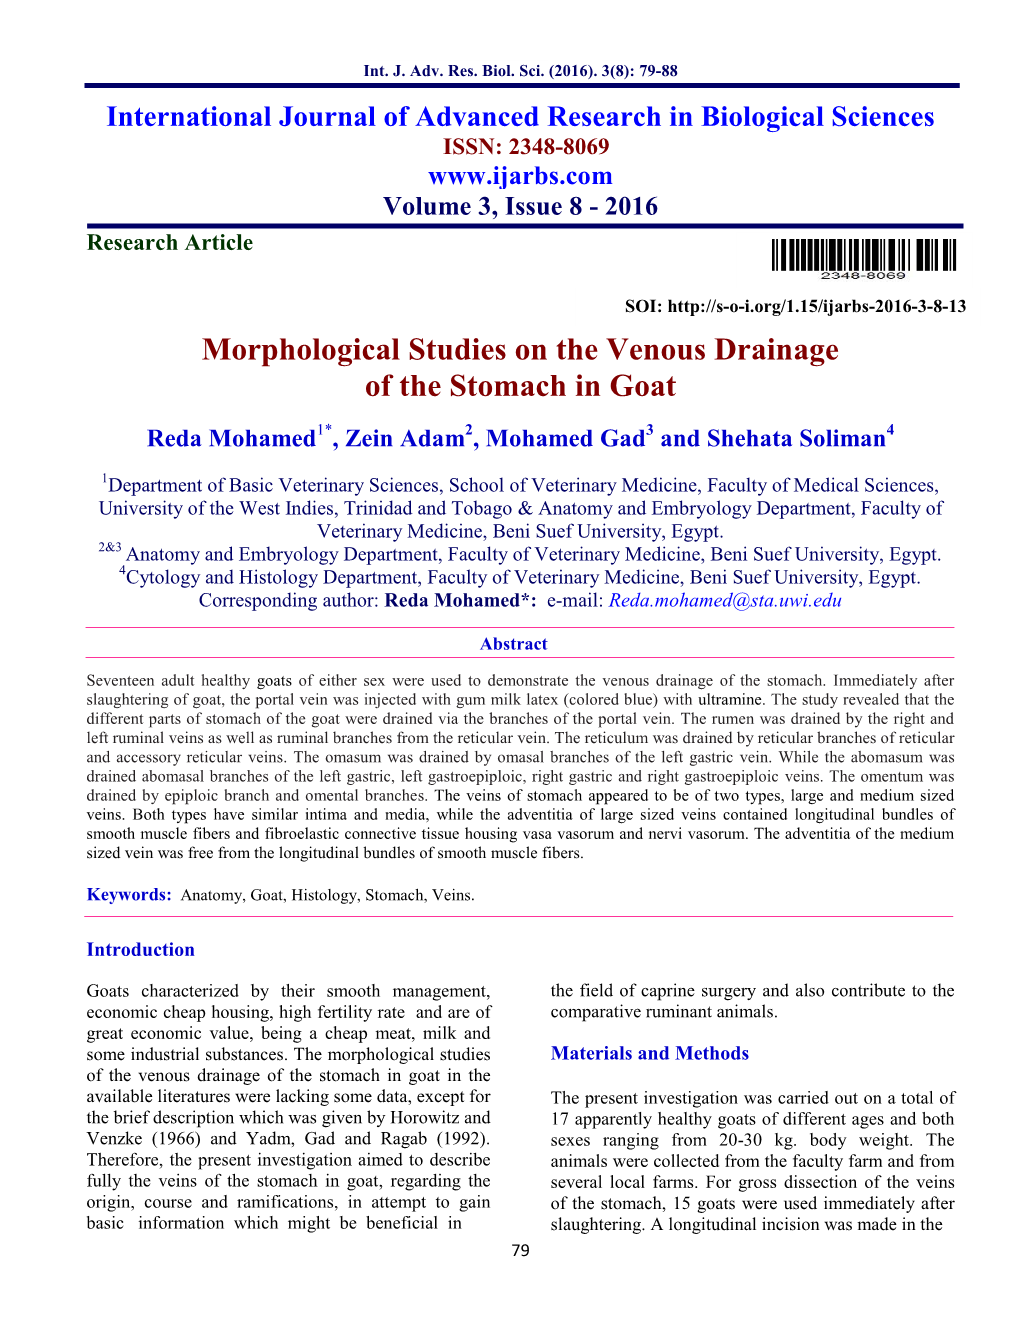 Morphological Studies on the Venous Drainage of the Stomach in Goat Reda Mohamed1*, Zein Adam2, Mohamed Gad3 and Shehata Soliman4